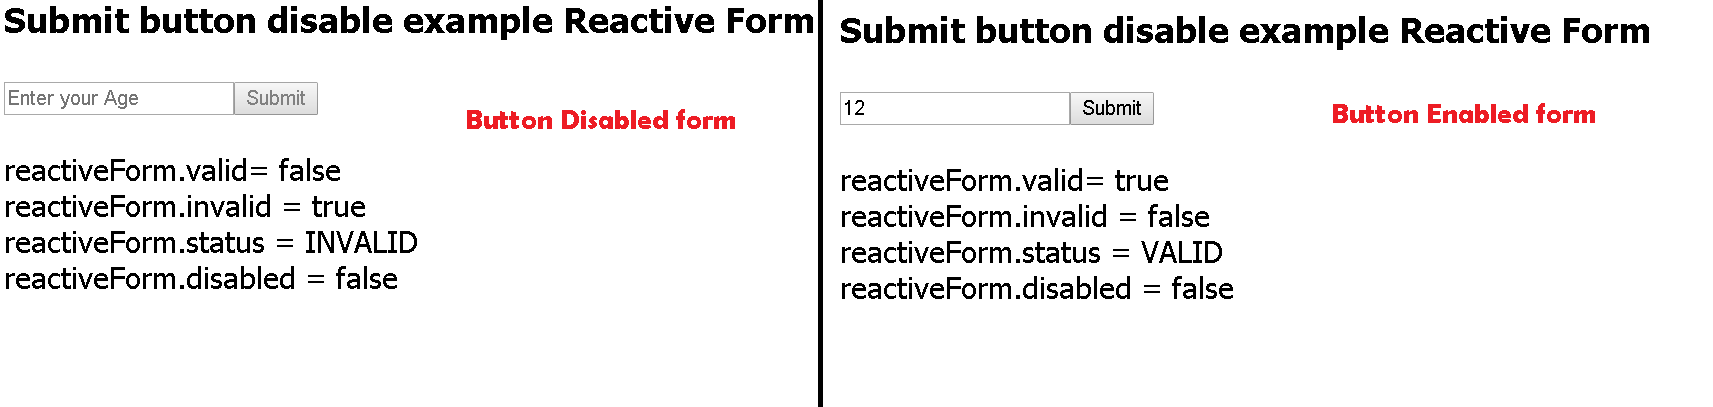 Button disabled form invalid button